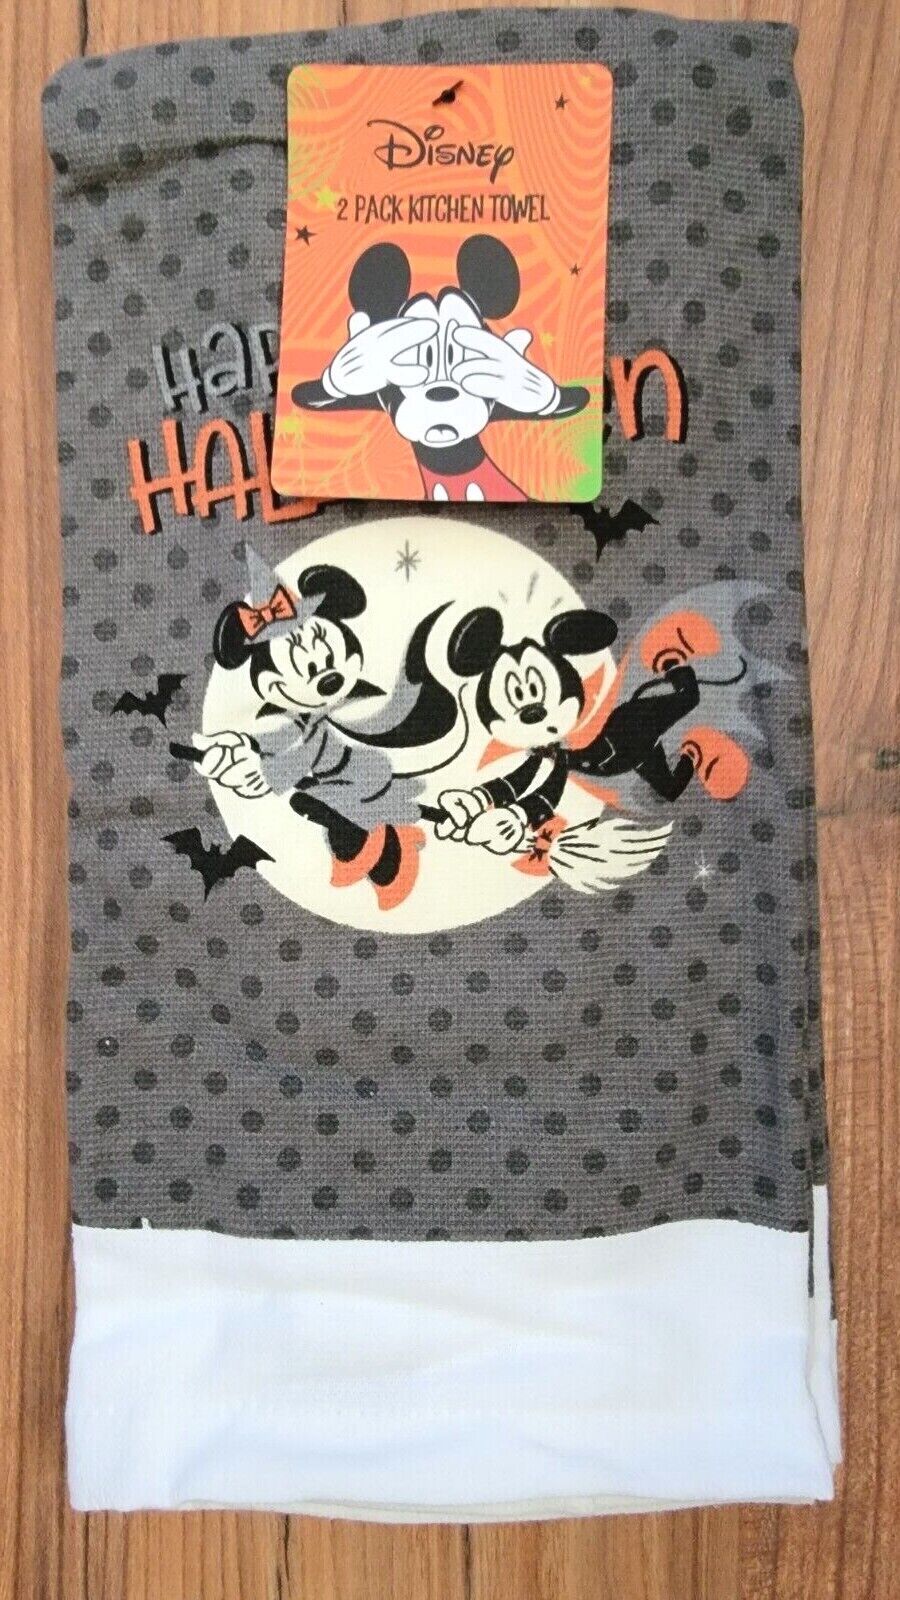 HALLOWEEN Kitchen Towels 2 Pack PEANUTS OR MICKEY MOUSE You Pick NEW WITH TAG - $18.99